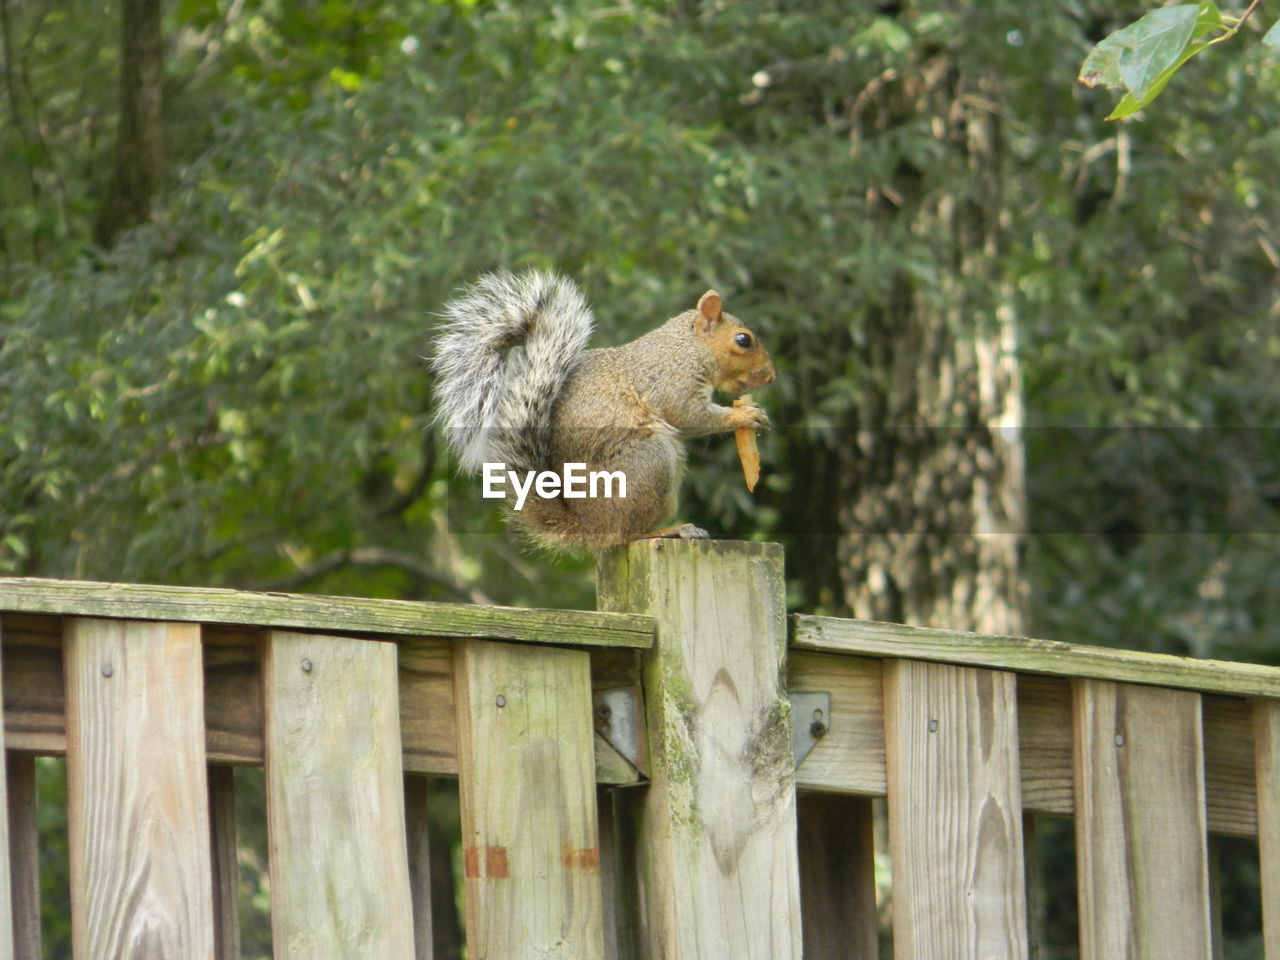 Squirrel eating on wooden railing